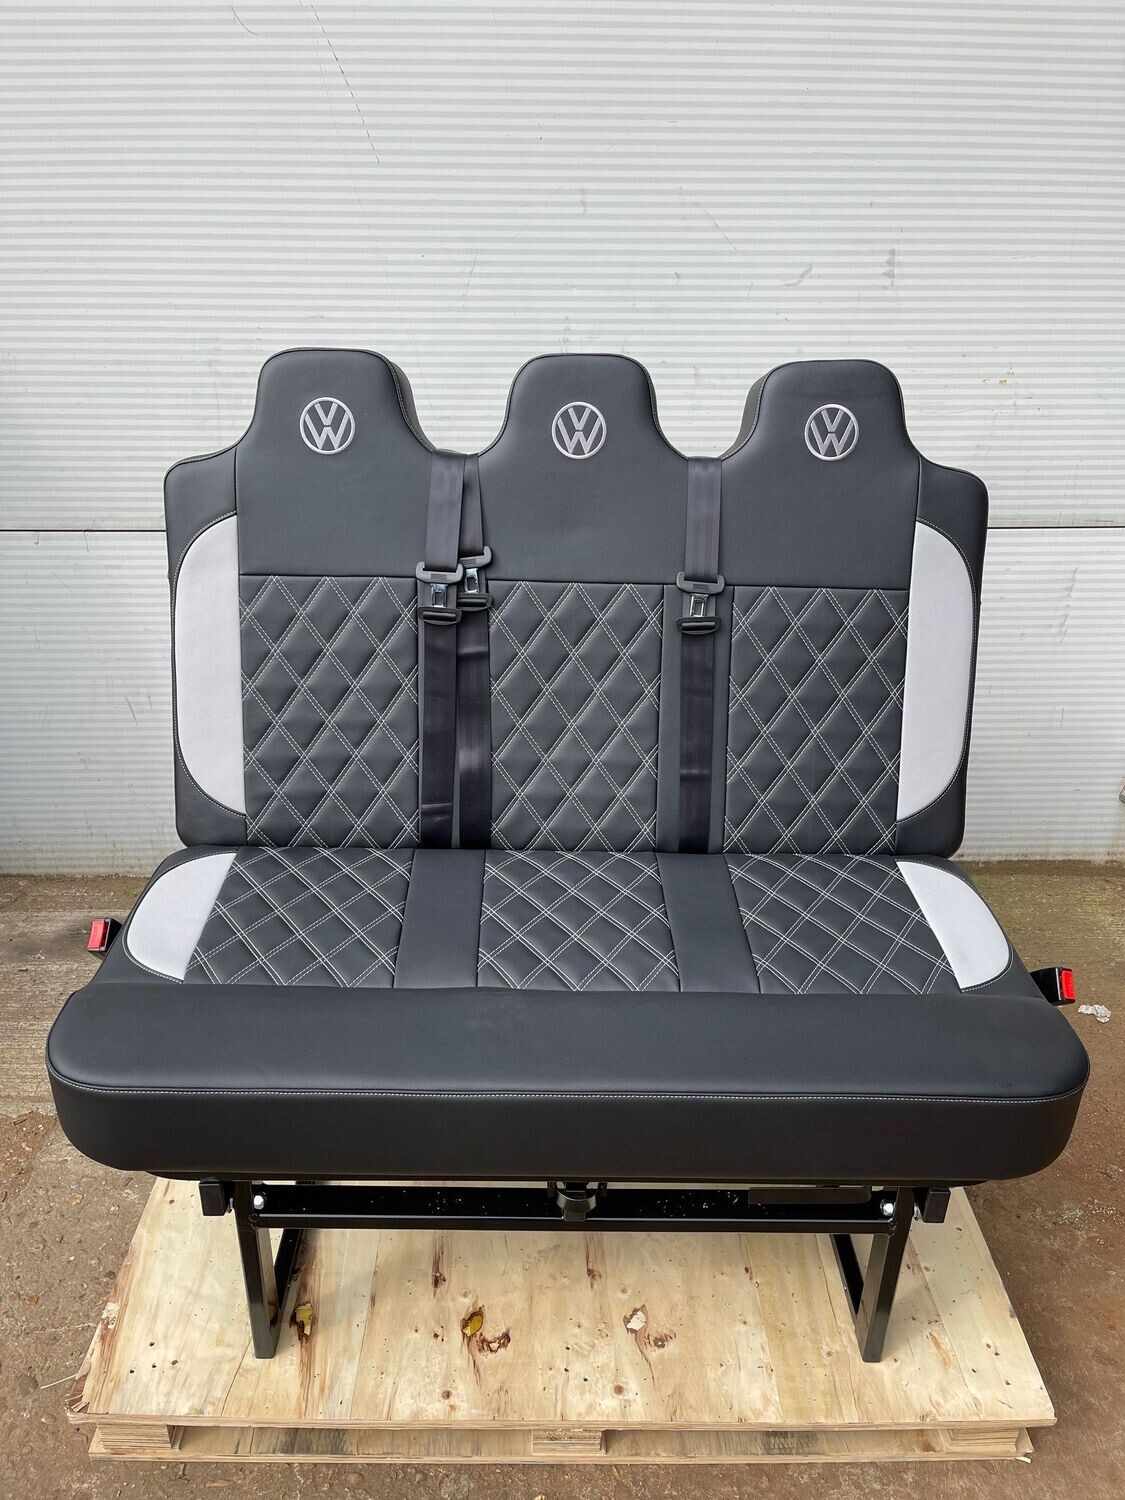 120cm 3 Seat Belt Rock n Roll Bed in Luxury Black Upholstery with White Cross Stitch.